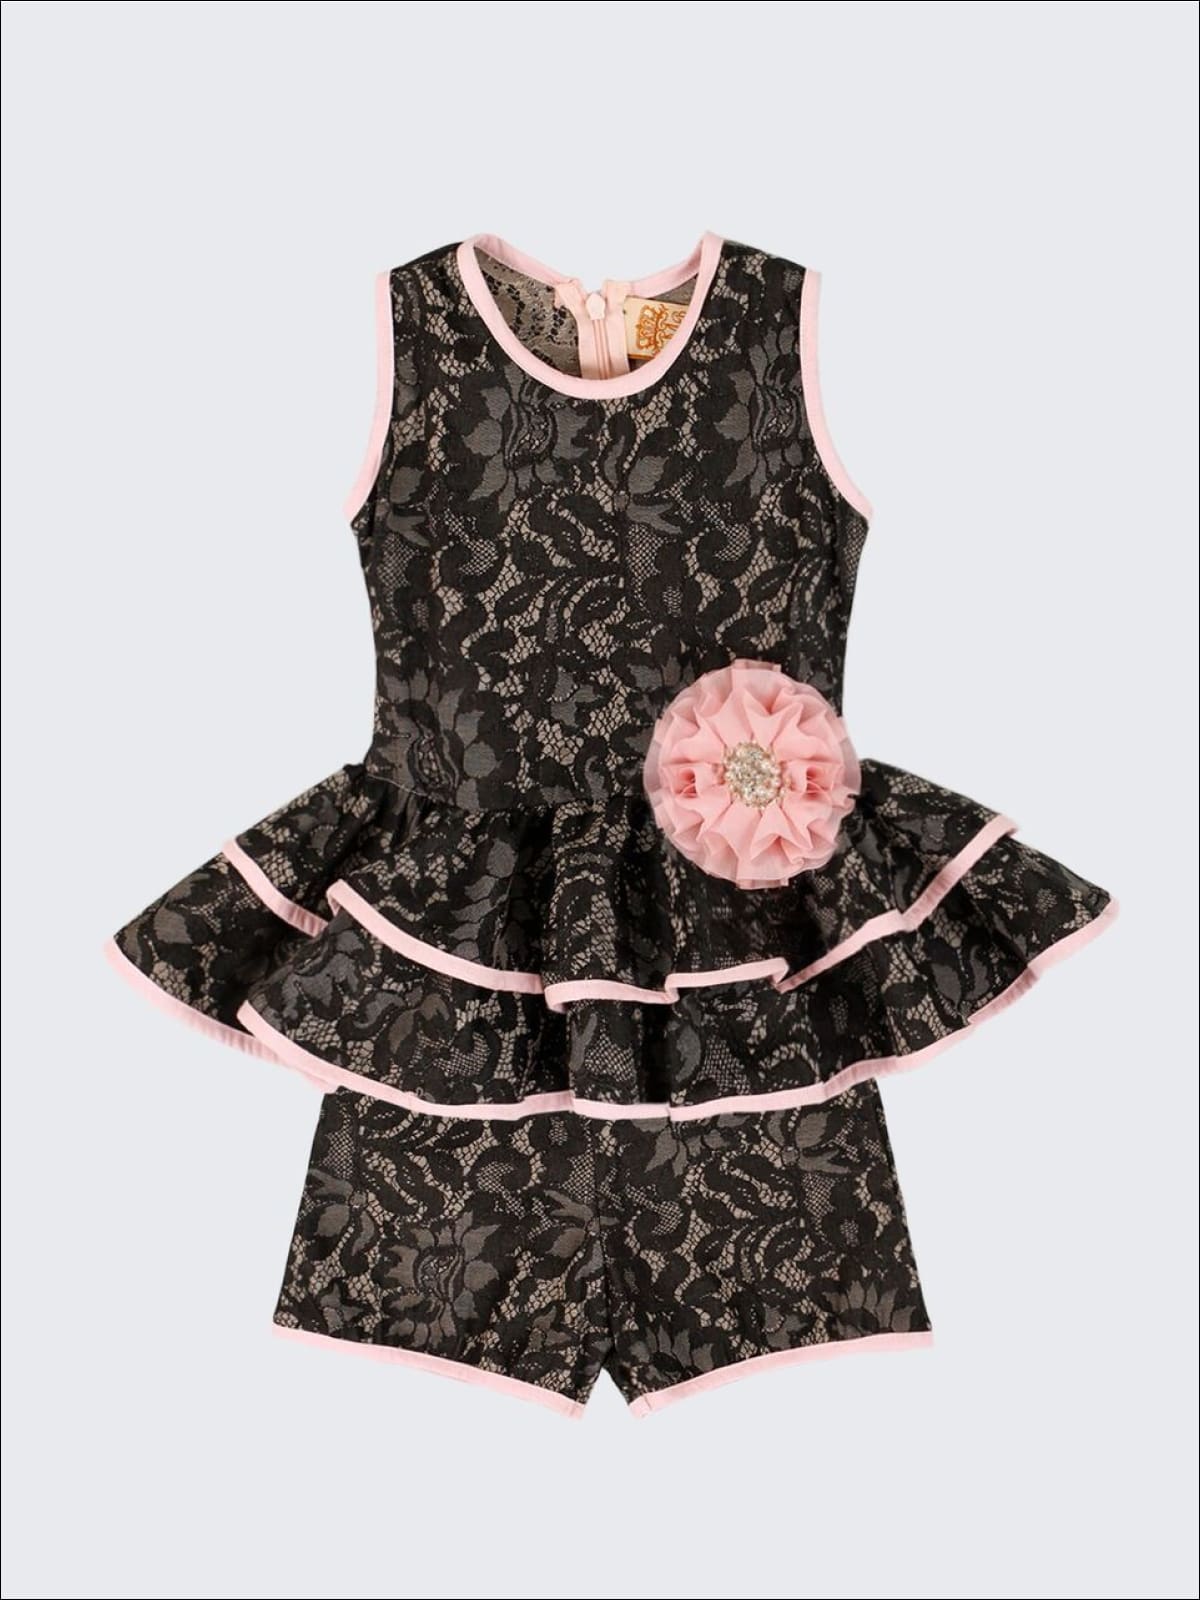 Girls Black Embossed Lace Sleeveless Double Peplum Top with Flower Clip & Shorts Set - Girls Spring Dressy Set